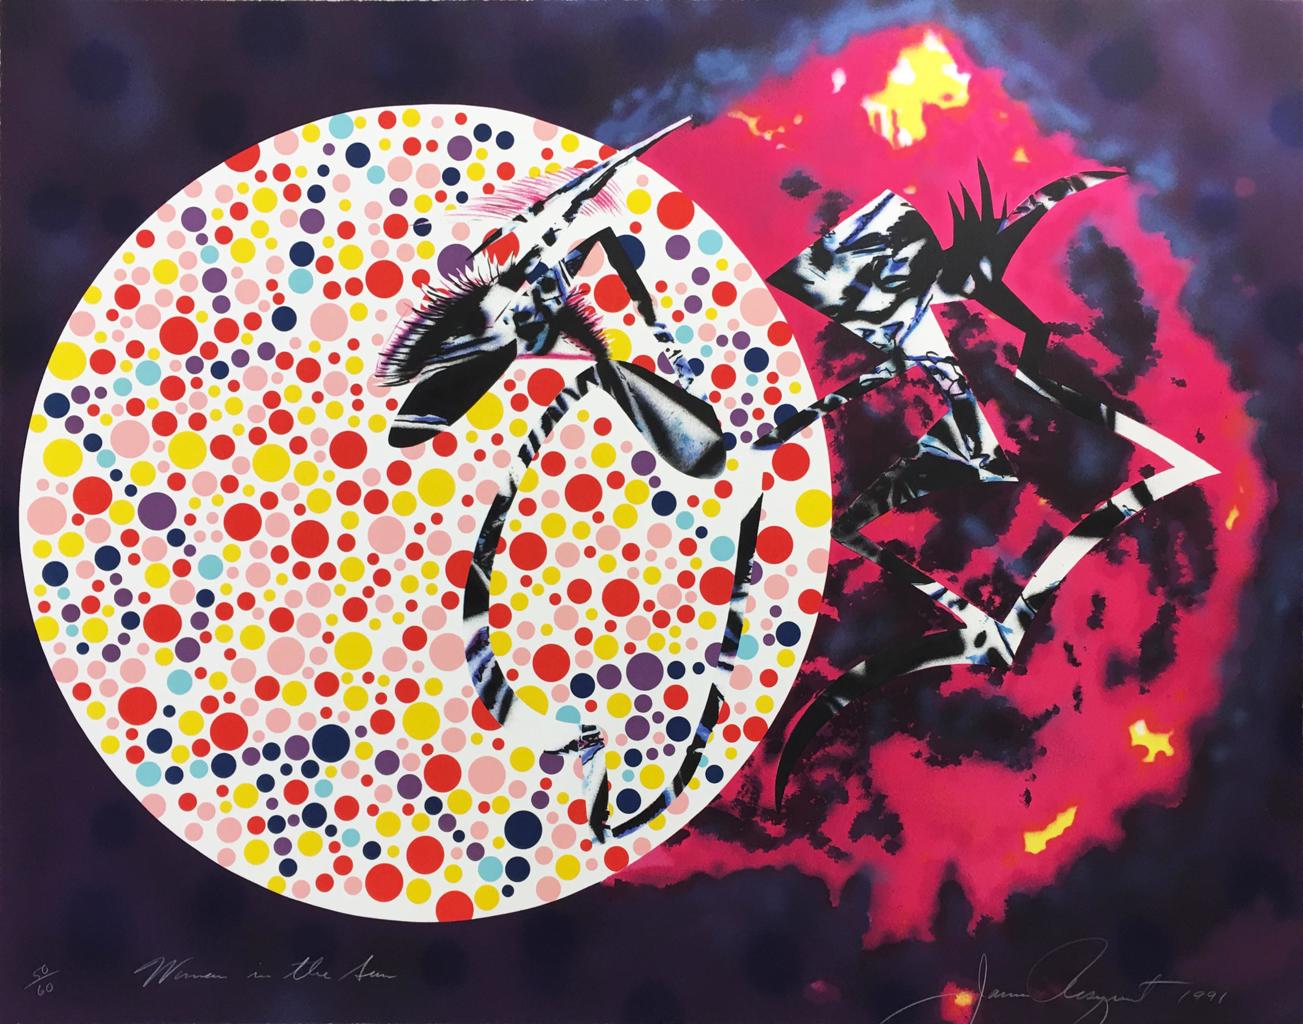 James Rosenquist, 'Woman in the Sun', 1991 | Available for Sale